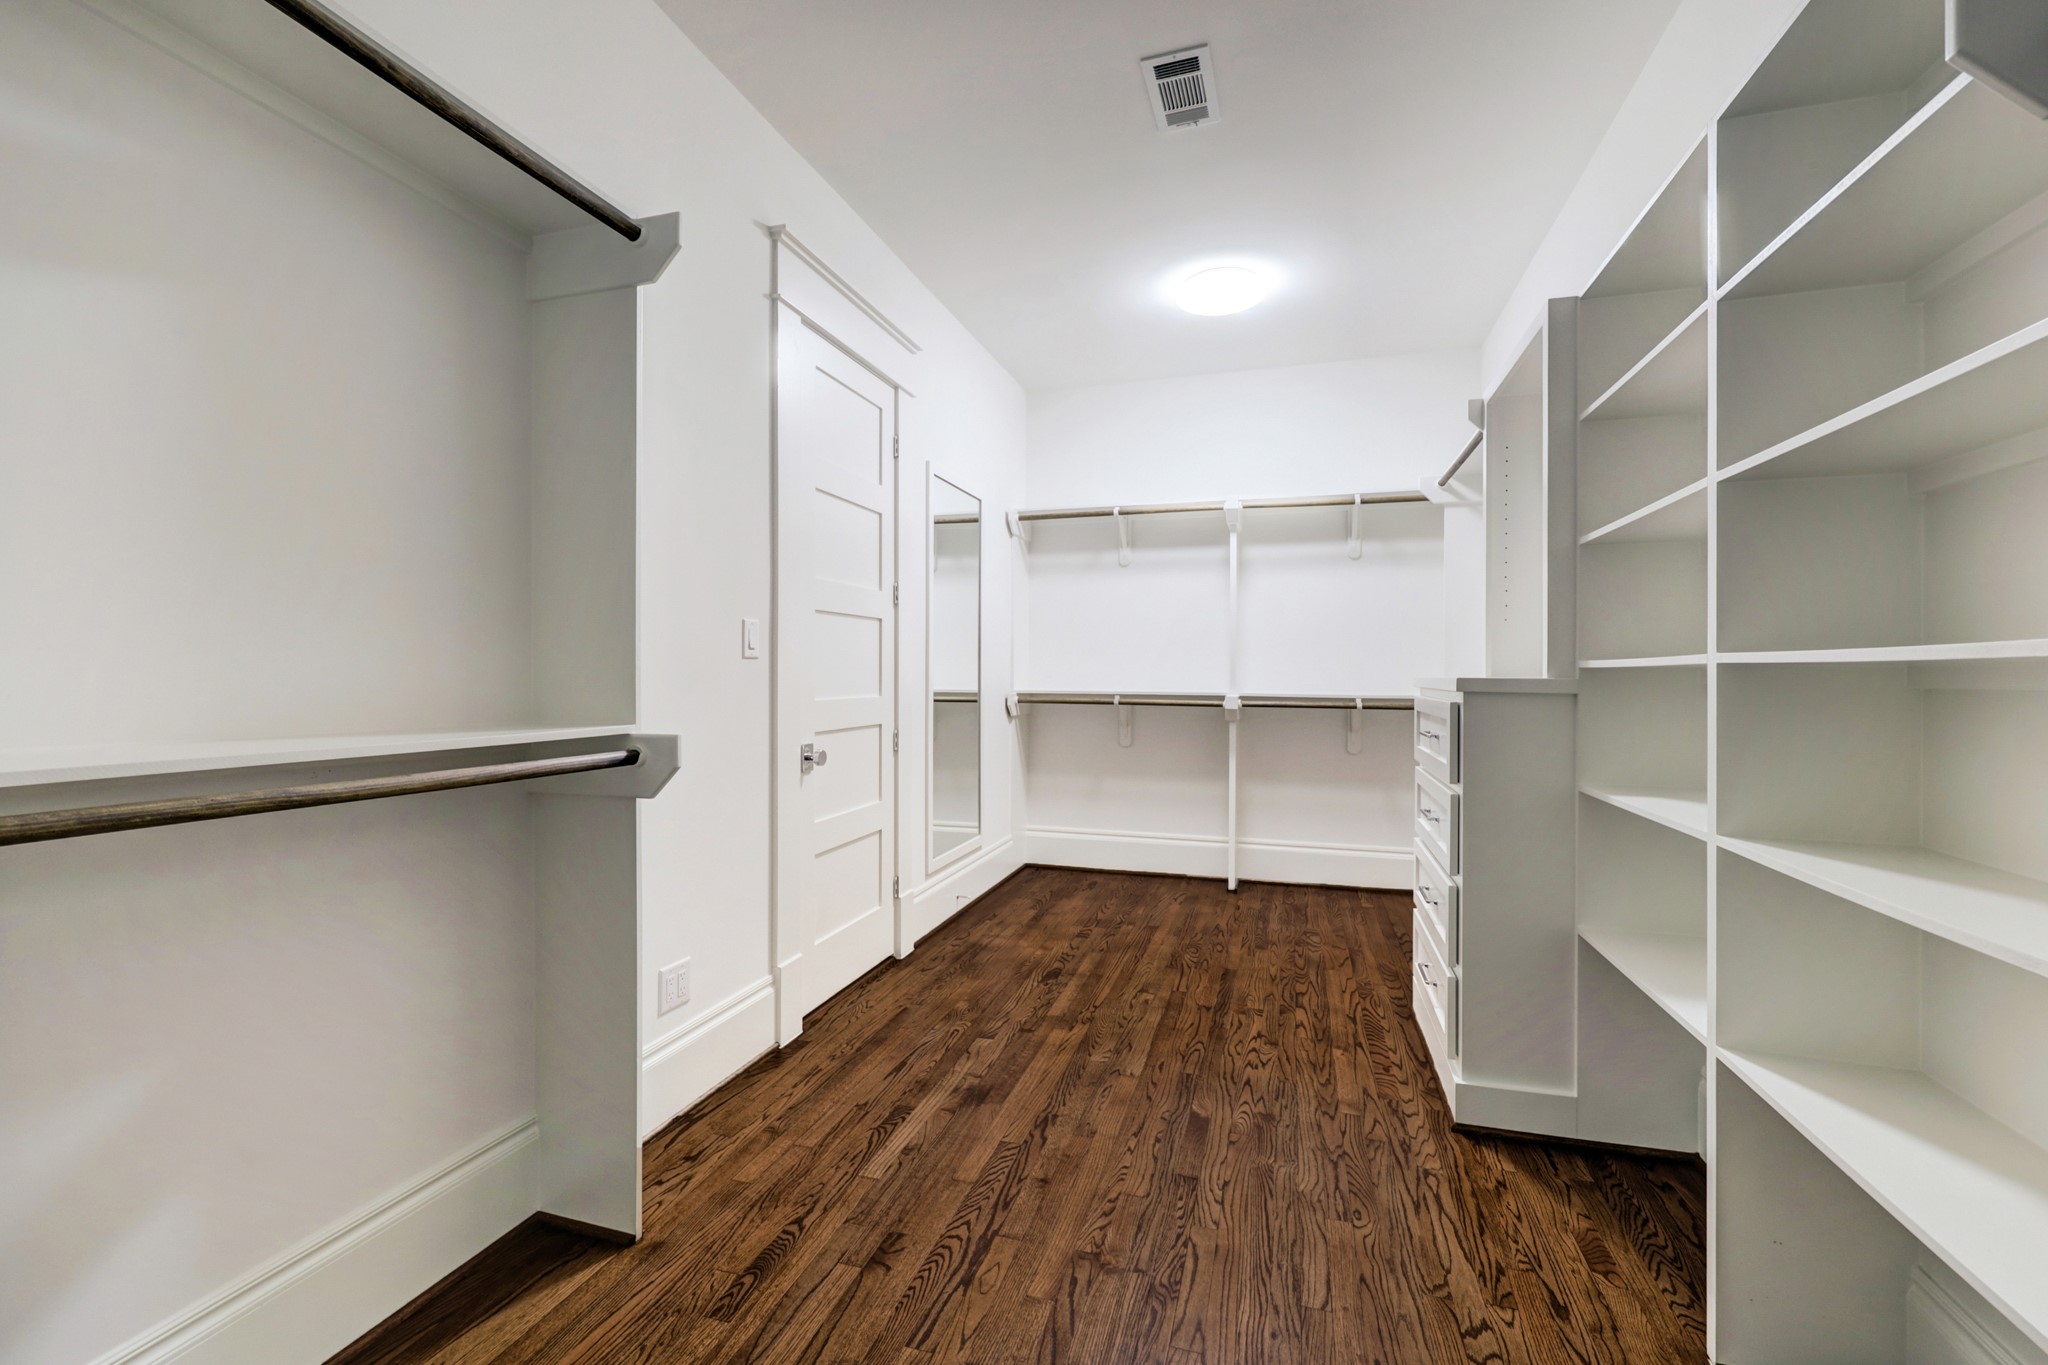 Off the primary bathroom, a palatial walk-in closet tames even the most extensive wardrobe with built-in shelves, hanging rods and drawers.